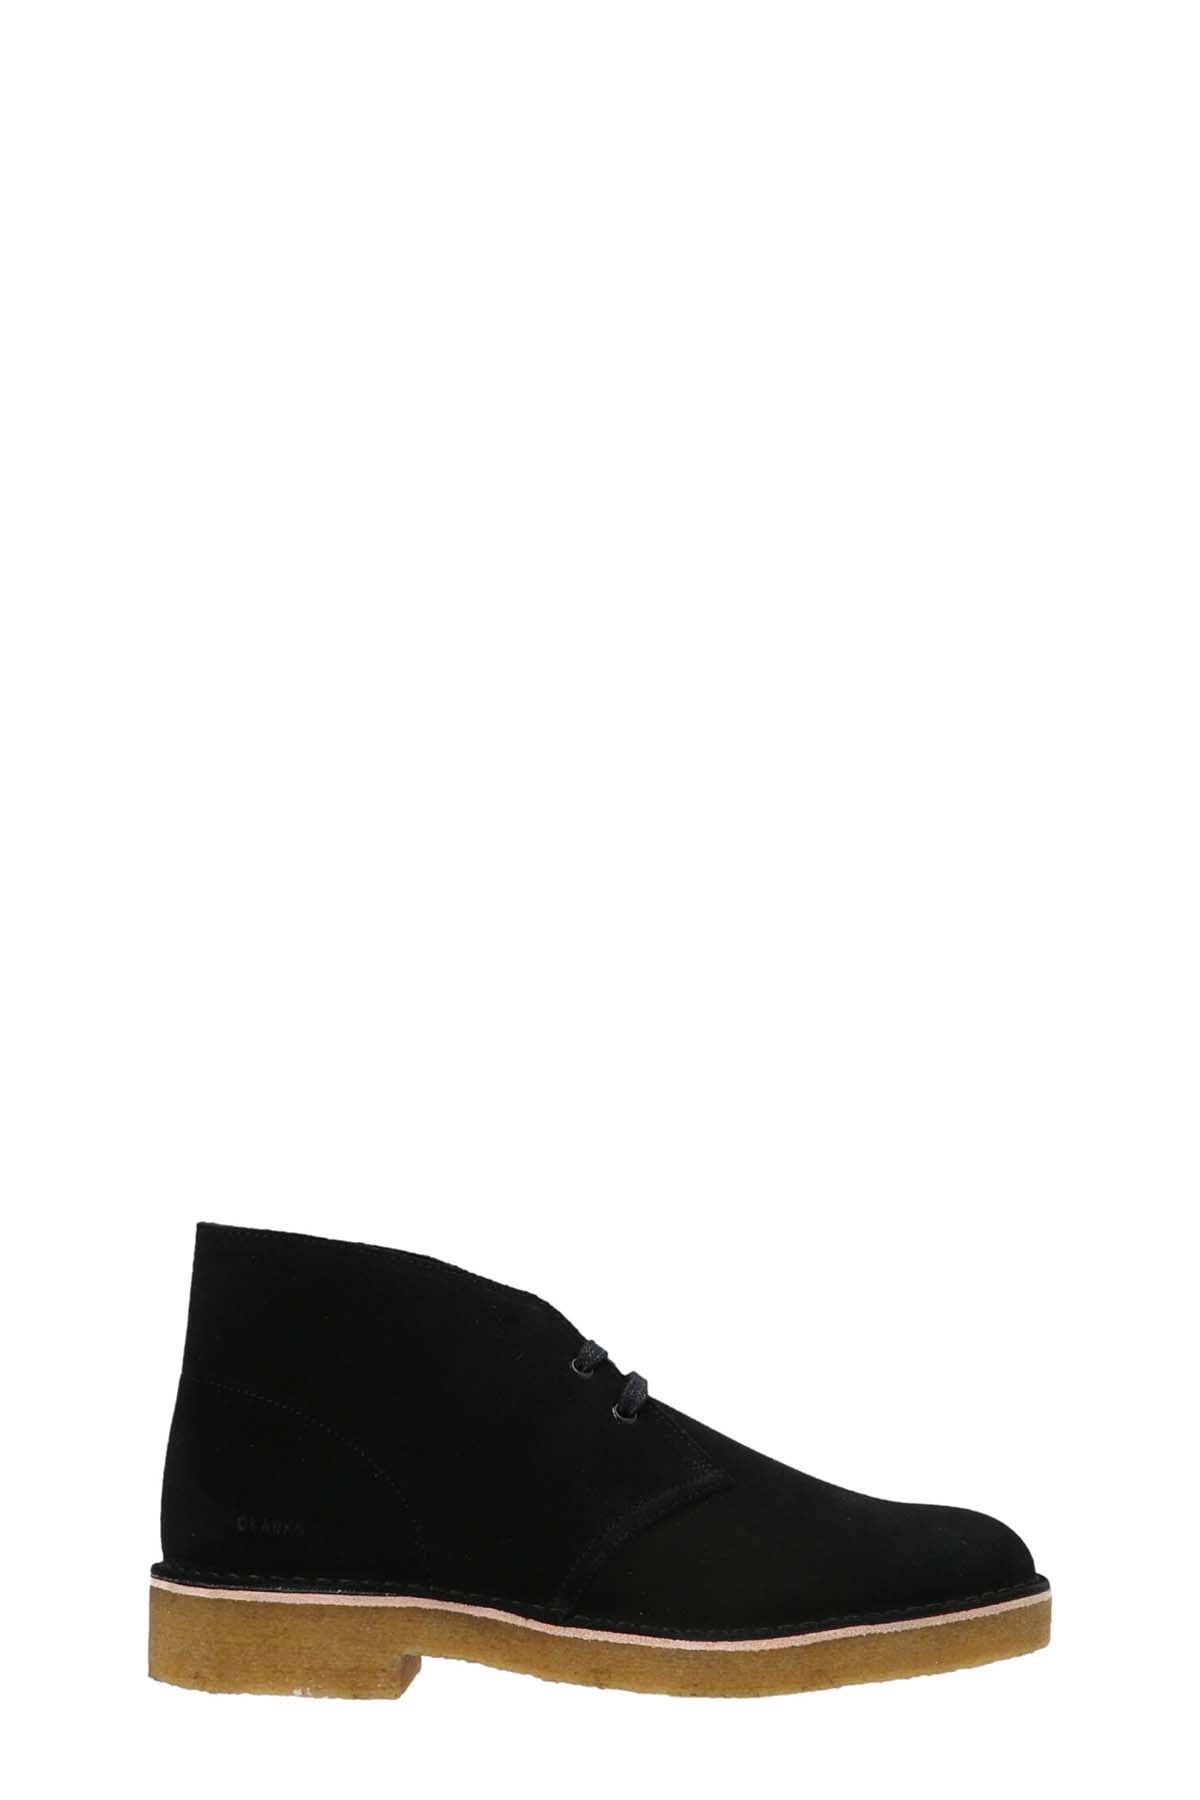 CLARKS ORIGINALS	 'Desert Boot' Lace-Up Ankle Boots